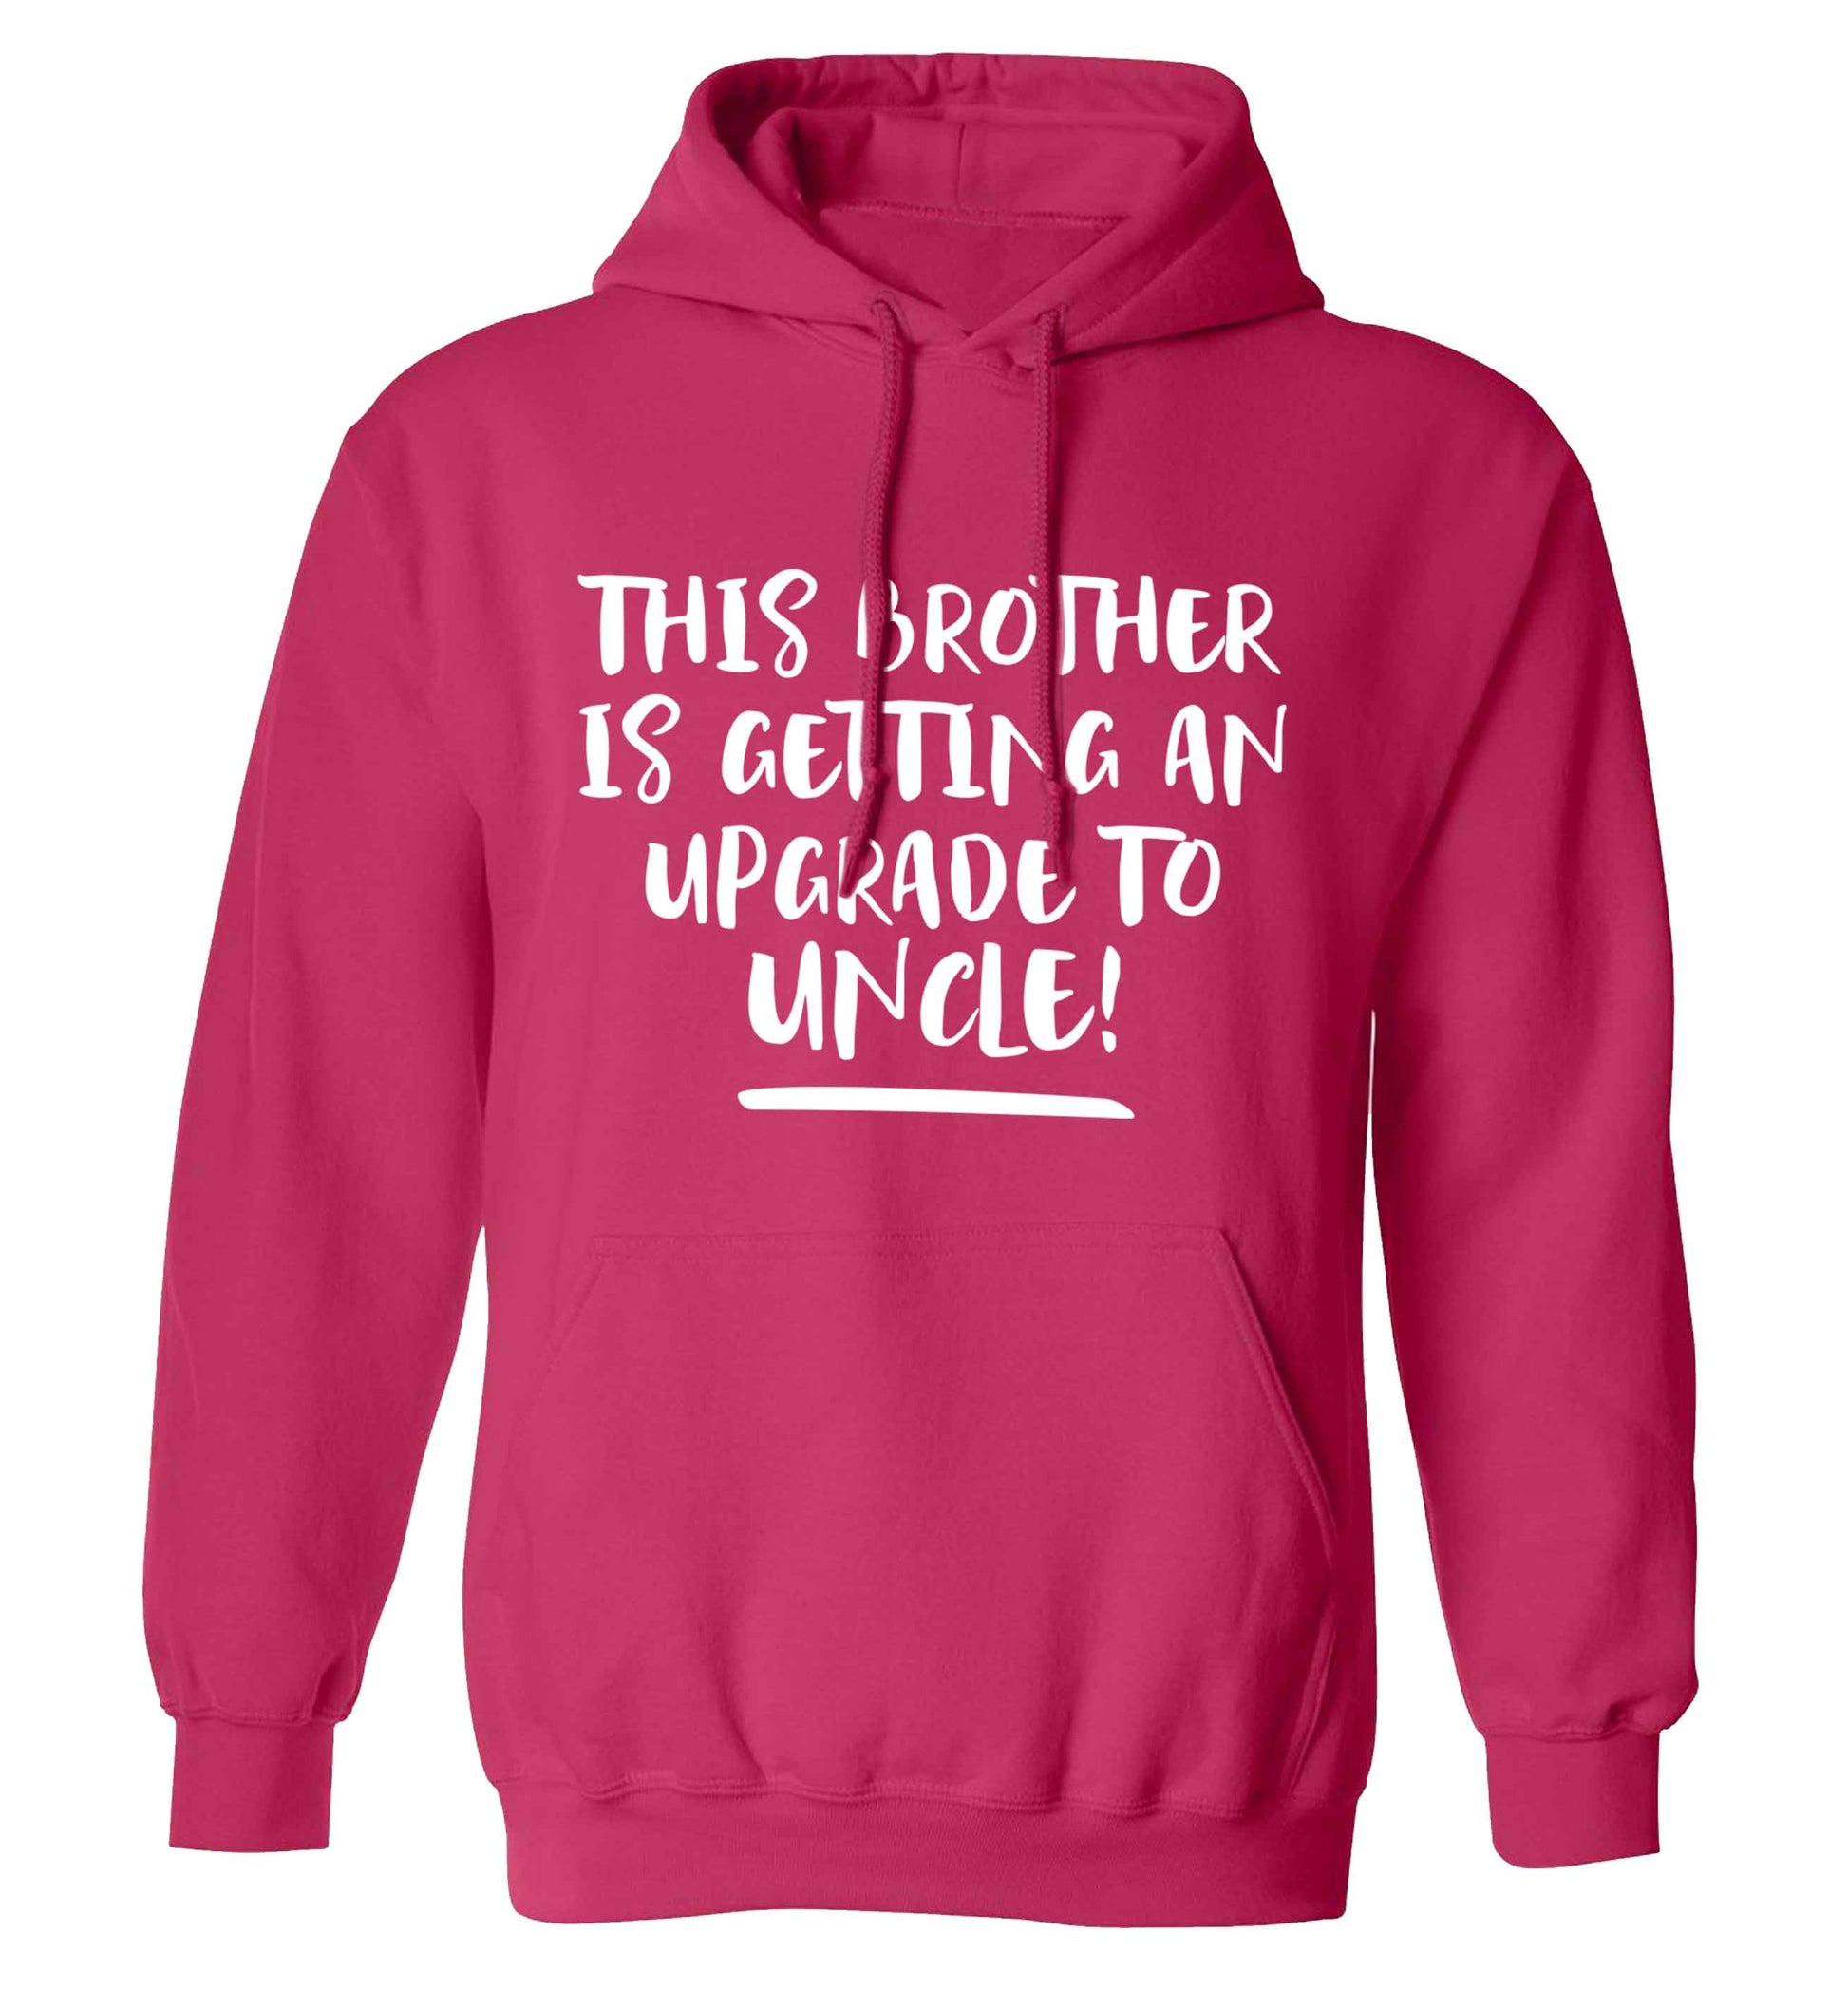 This brother is getting an upgrade to uncle! adults unisex pink hoodie 2XL